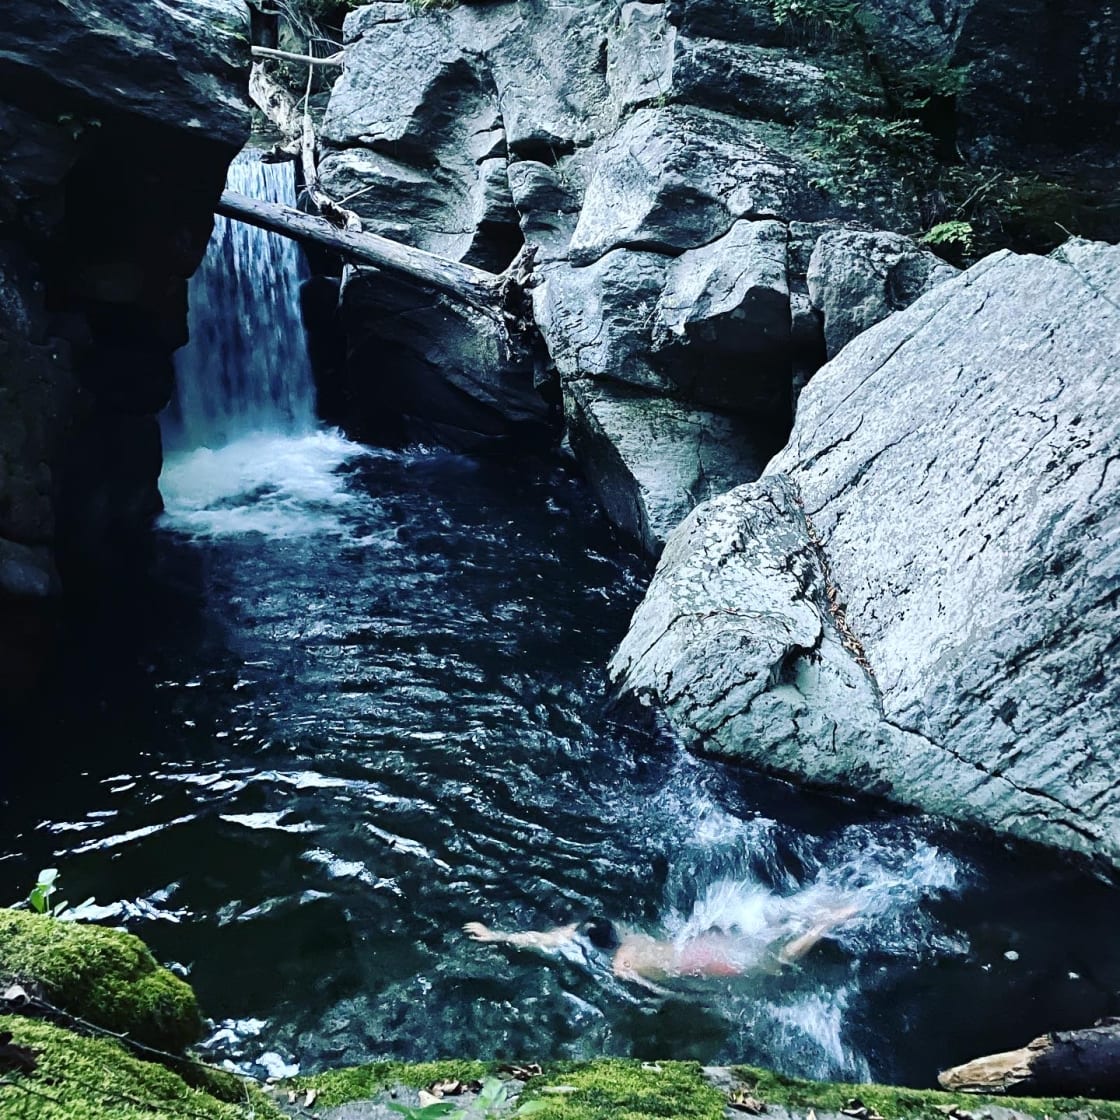 secret swimming waterfalls are all around us in the hills :)